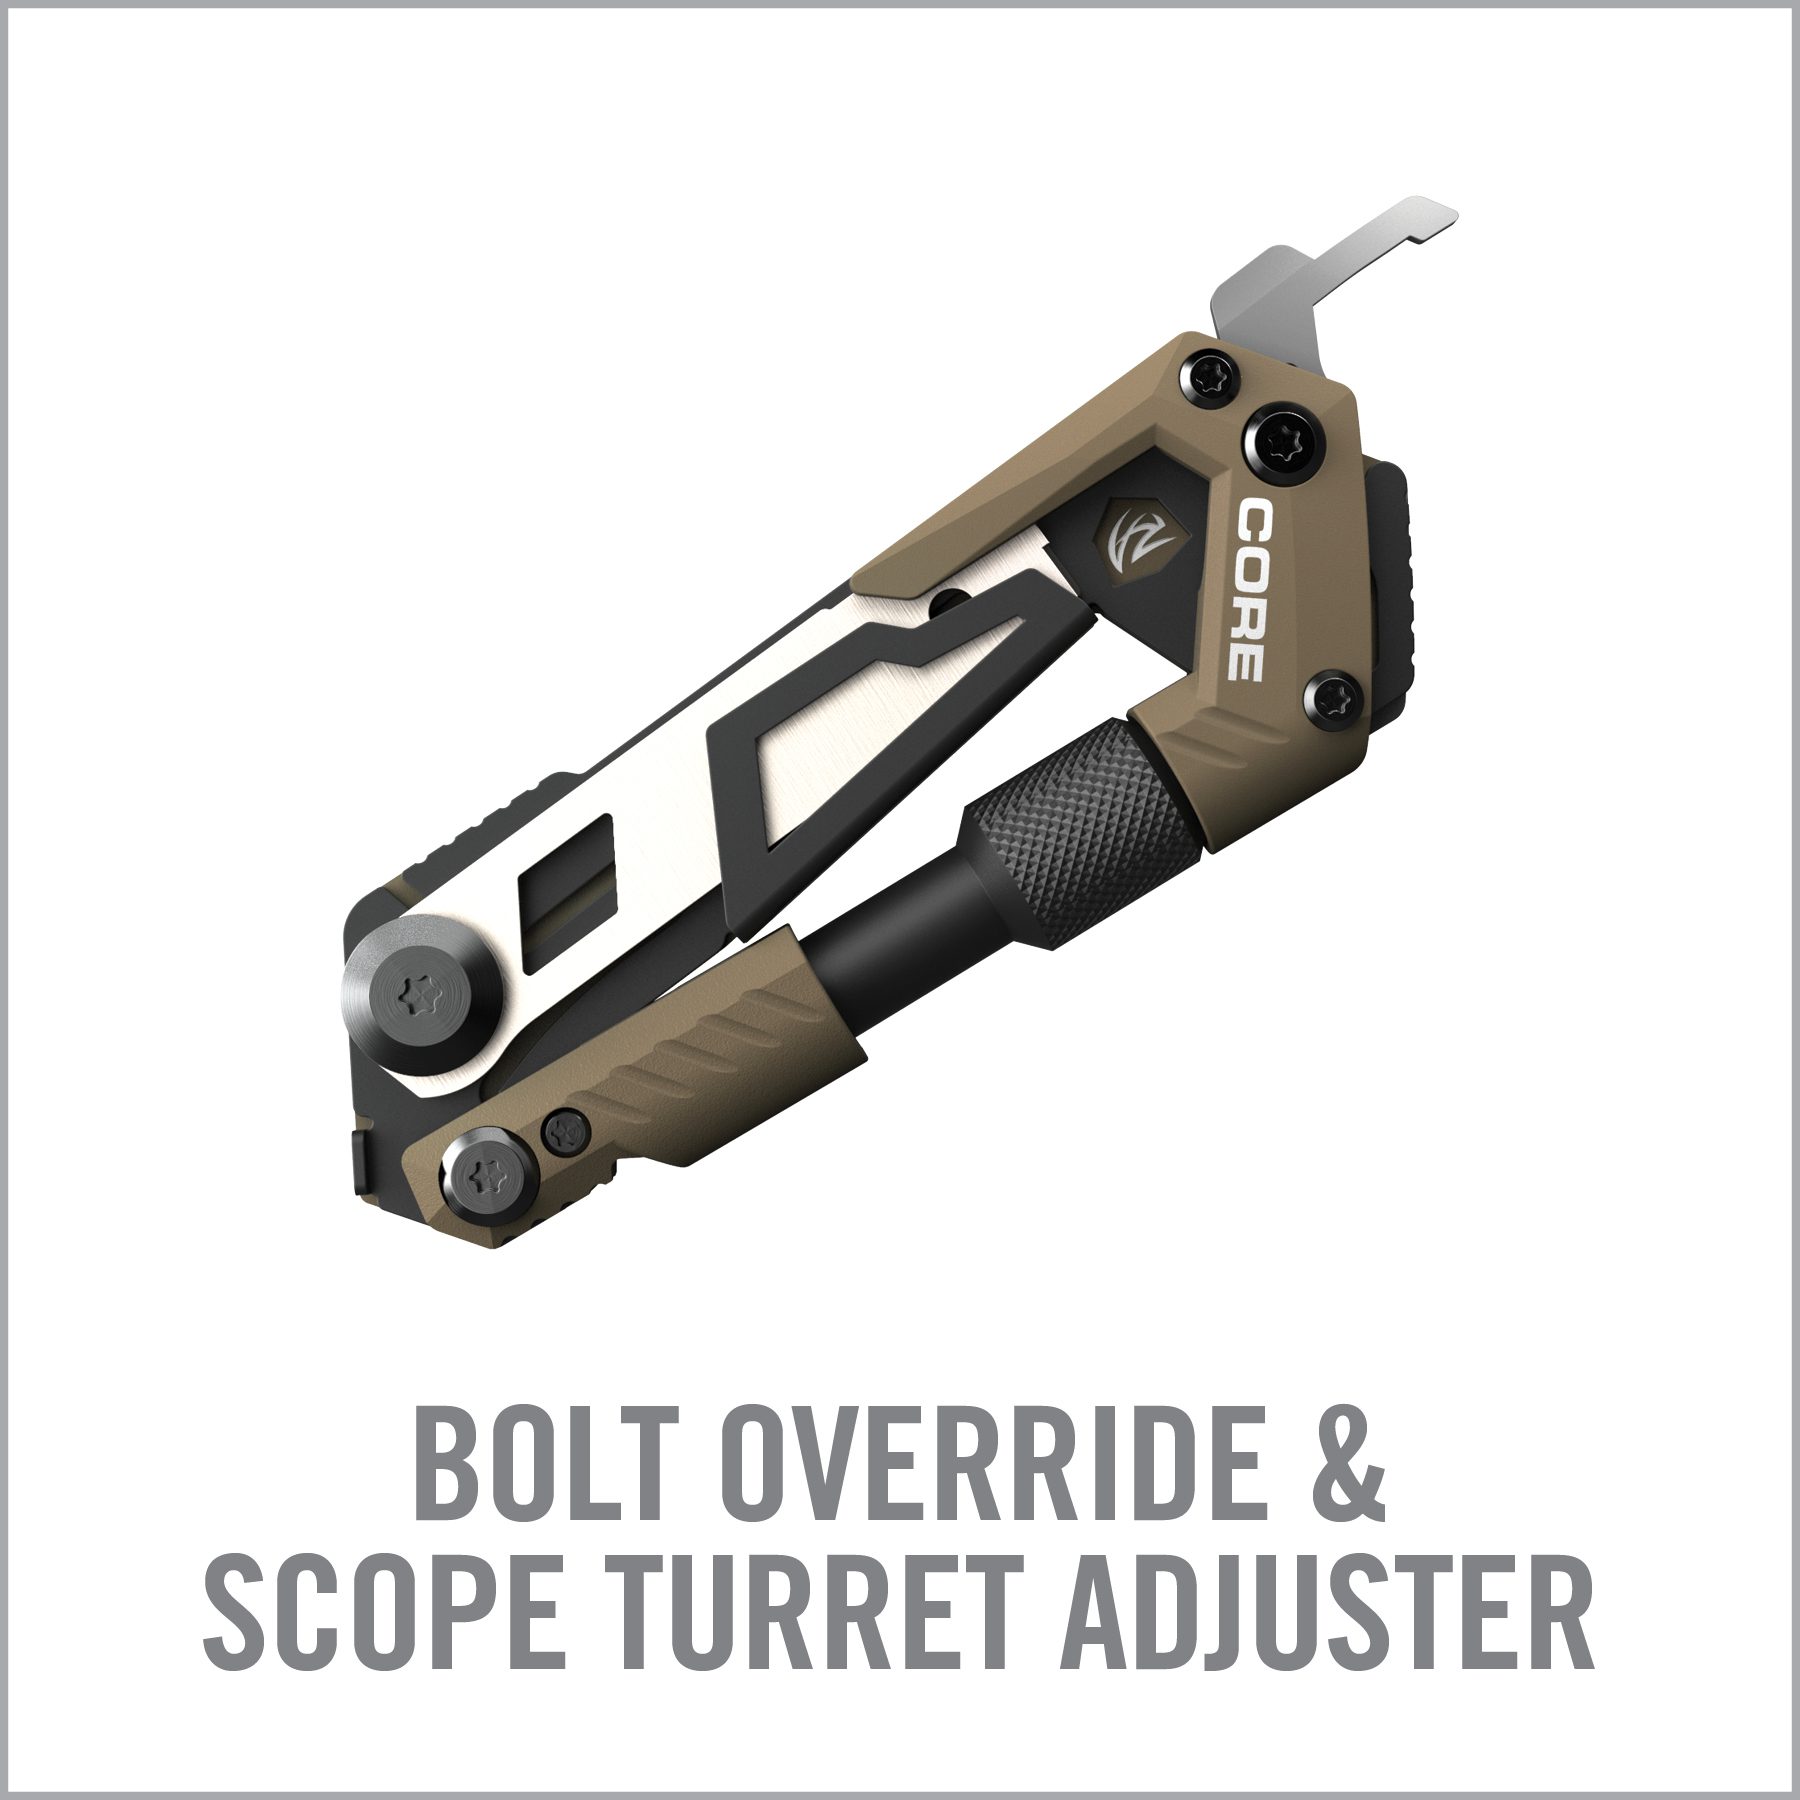 an image of a knife with the words bolt overridde and scope turret adjuster